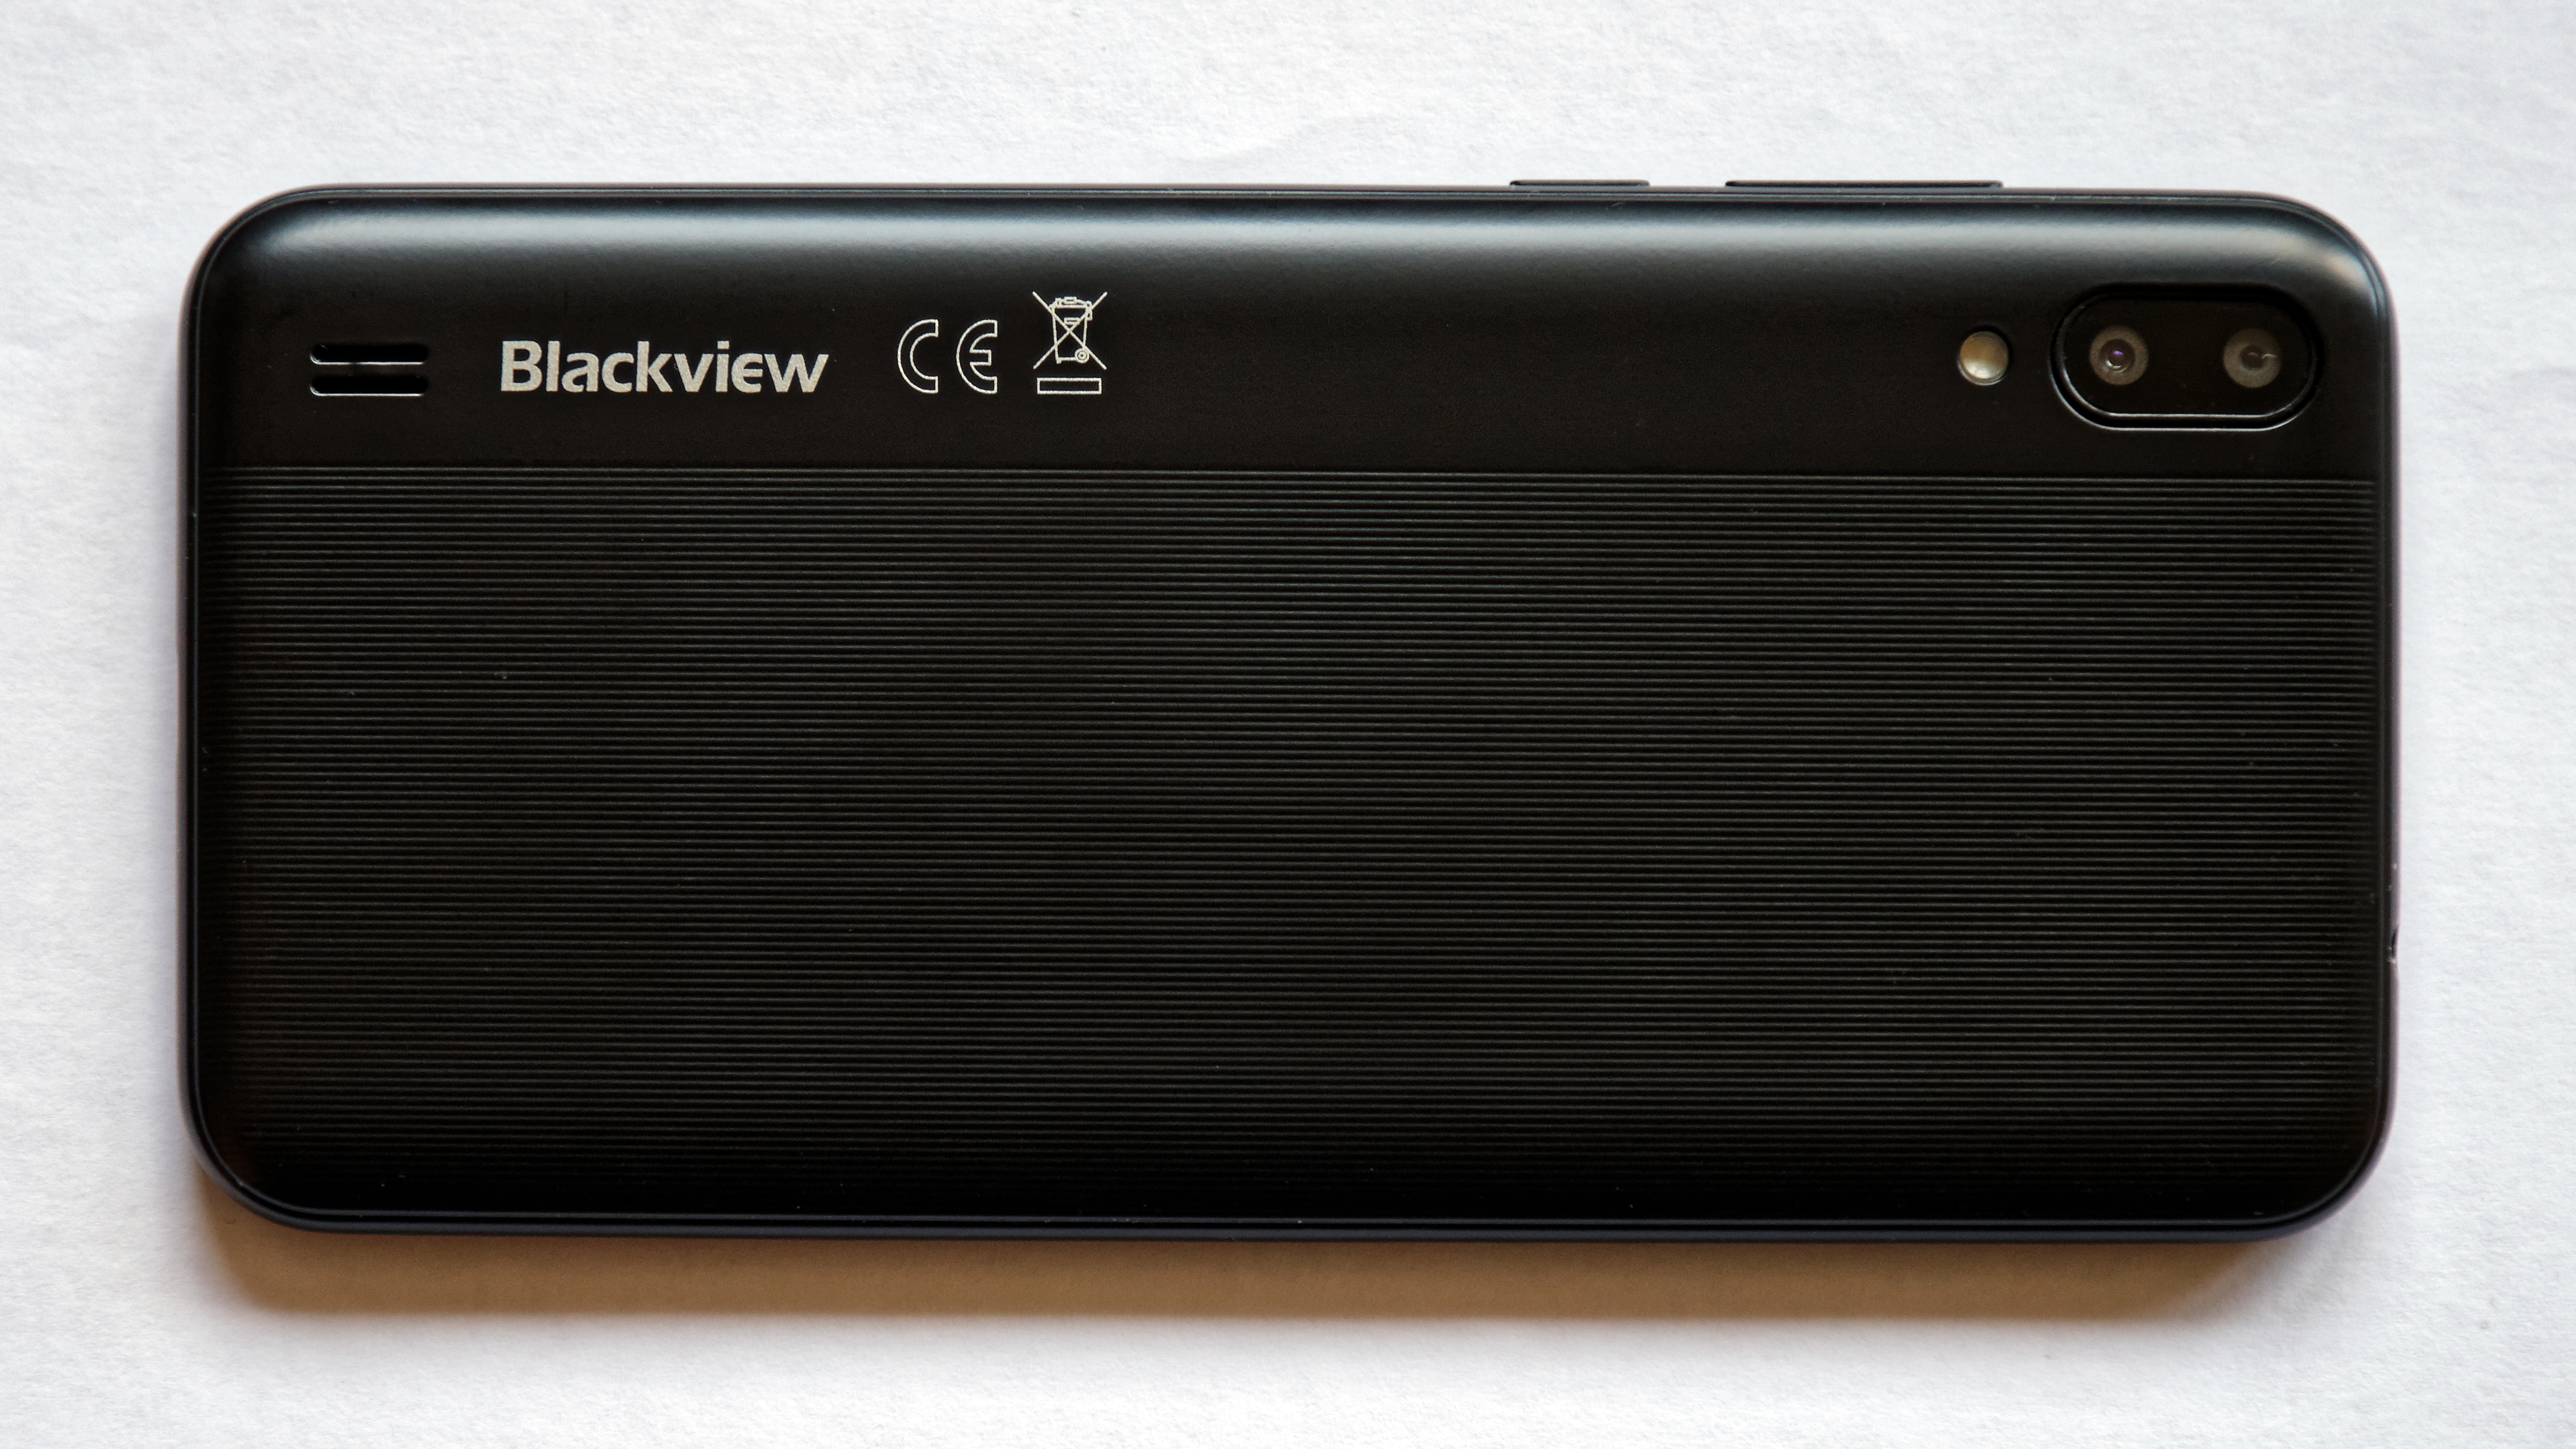 File:Blackview A60 Smartphone Android mobile phone back face.jpg -  Wikimedia Commons